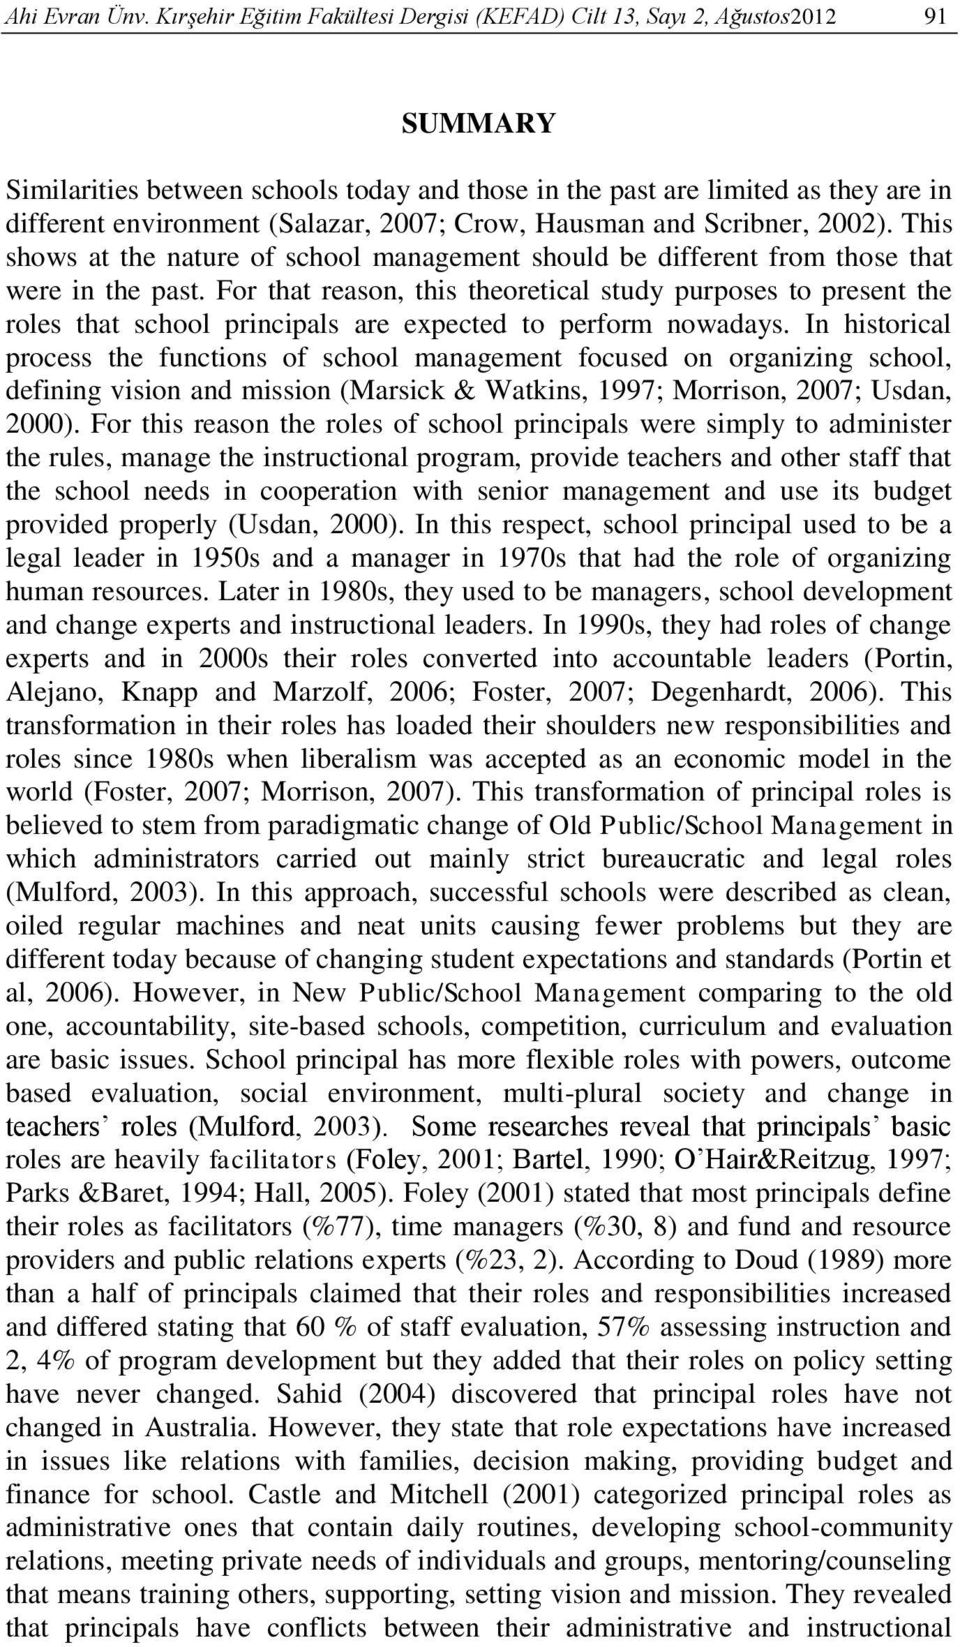 2007; Crow, Hausman and Scribner, 2002). This shows at the nature of school management should be different from those that were in the past.